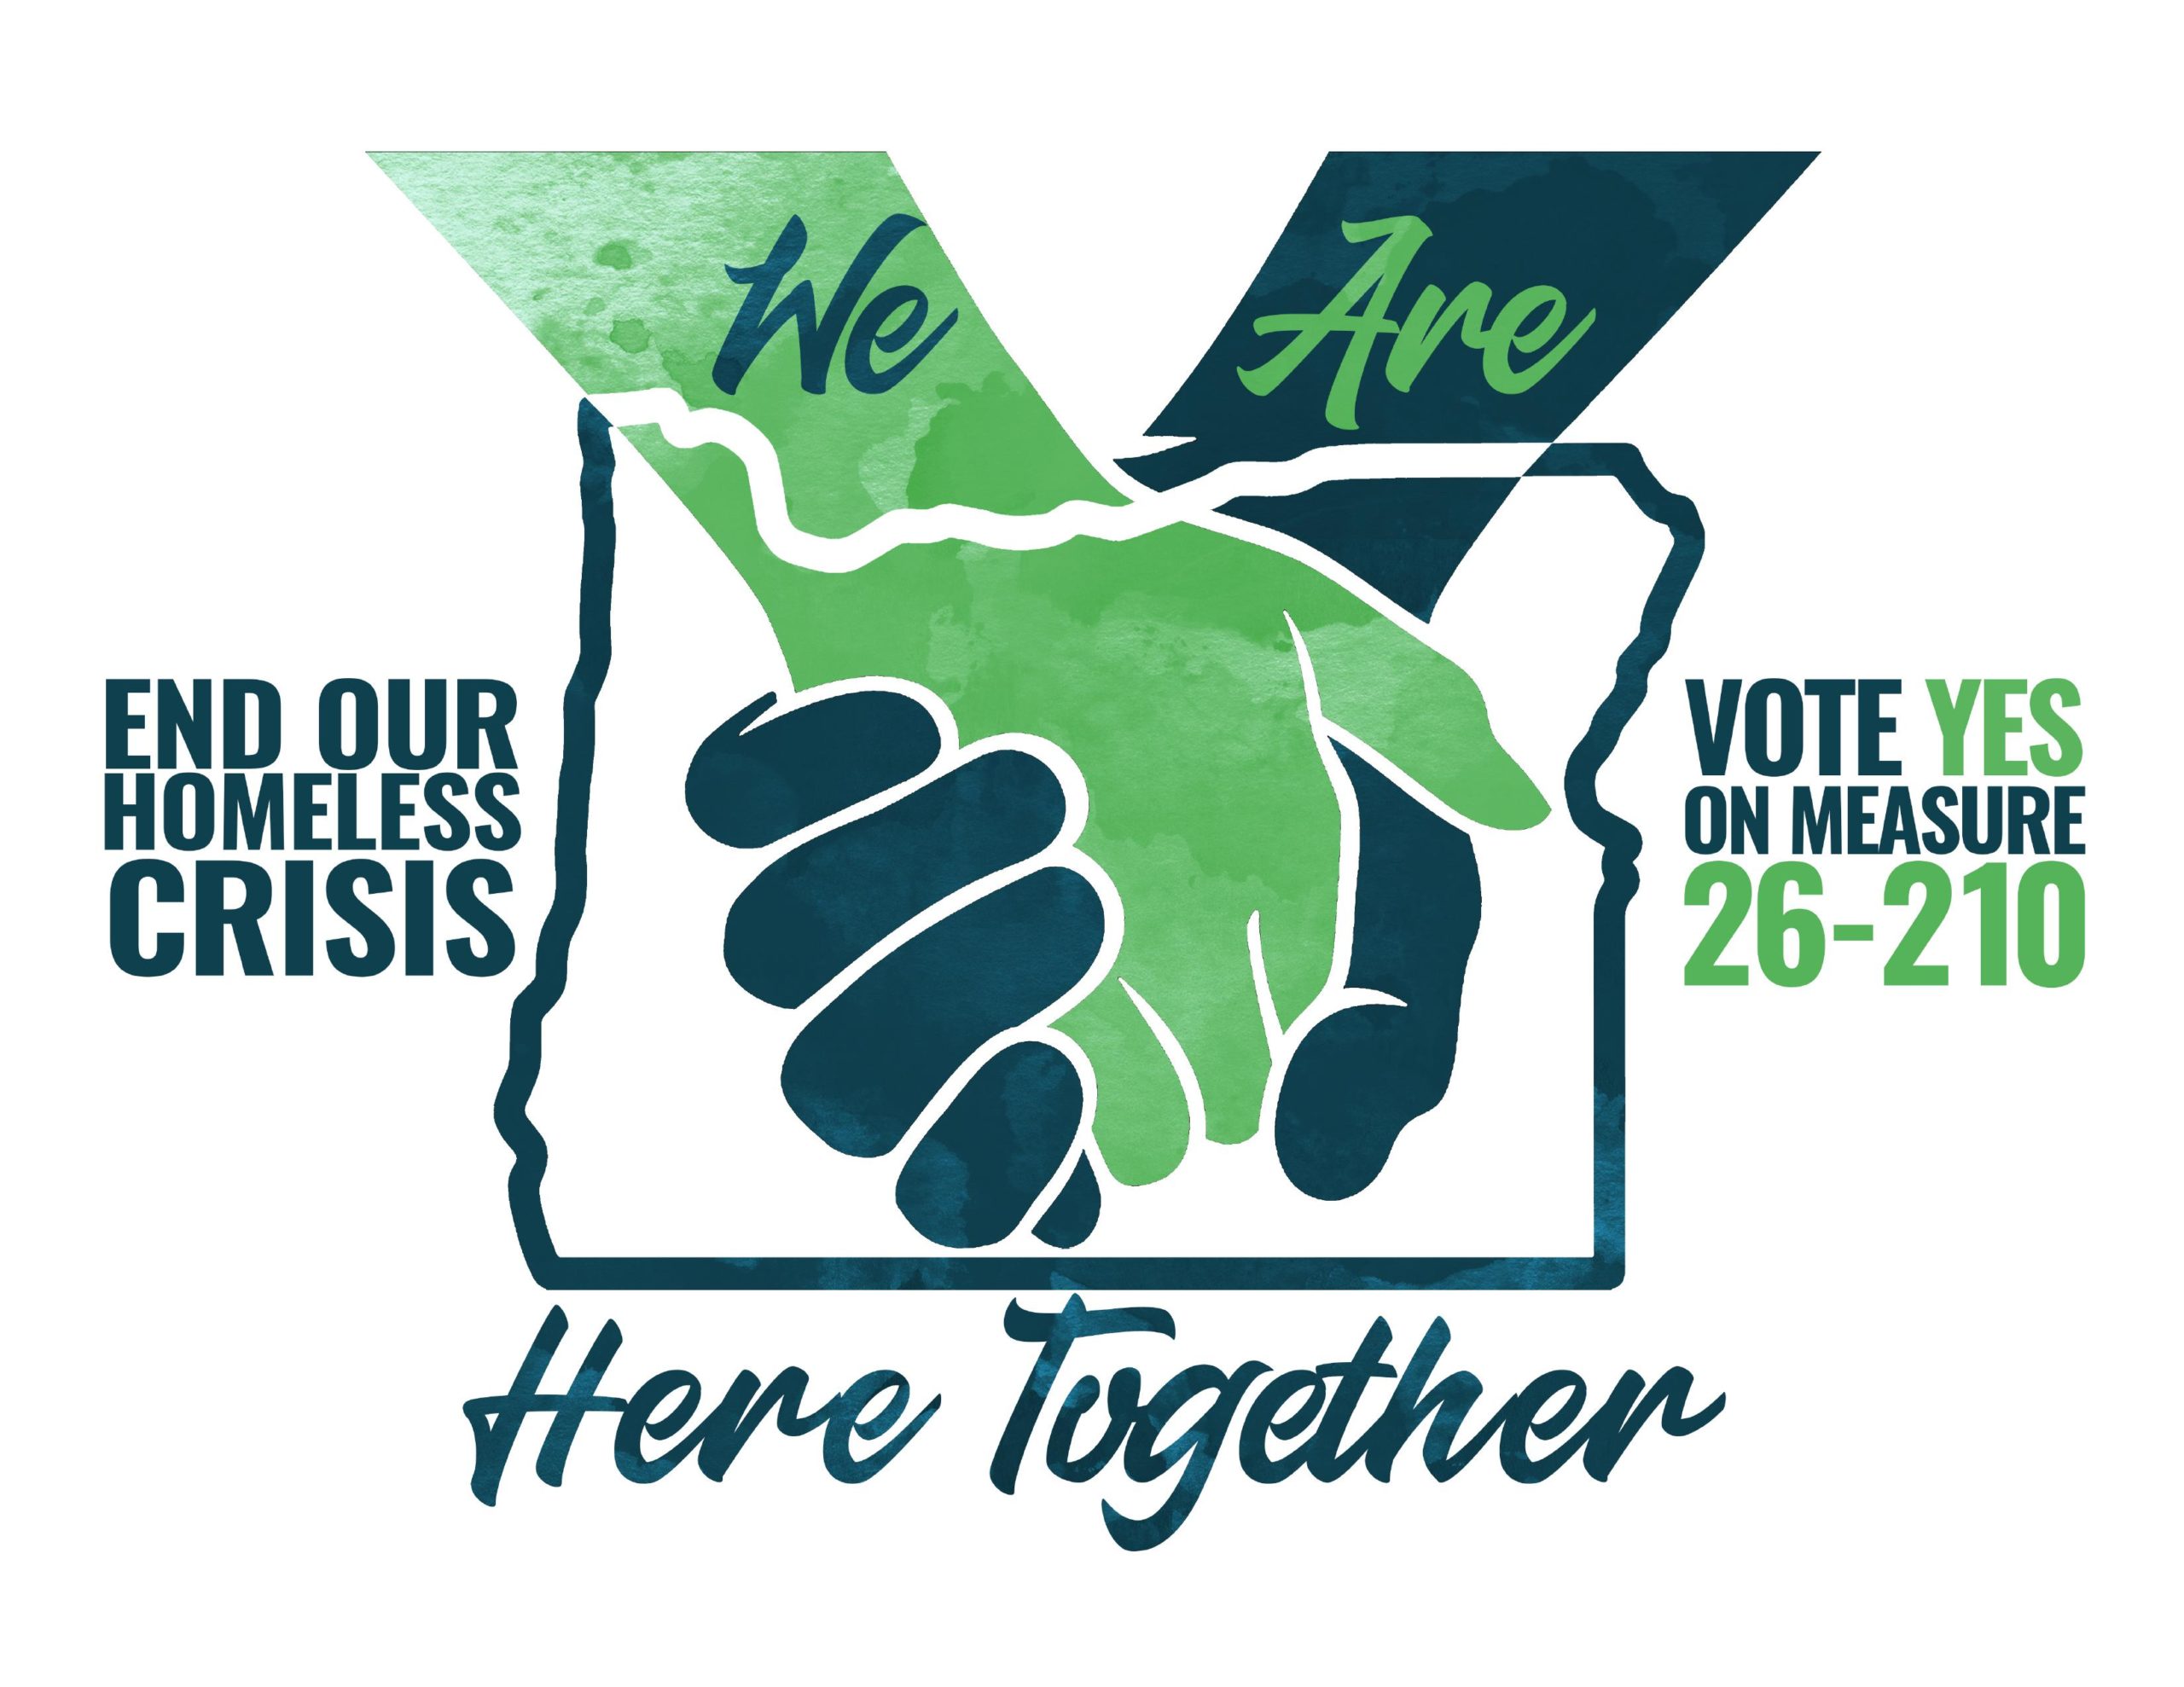 Here Together poster encouraging Oregonians to vote YES on Measure 26-210